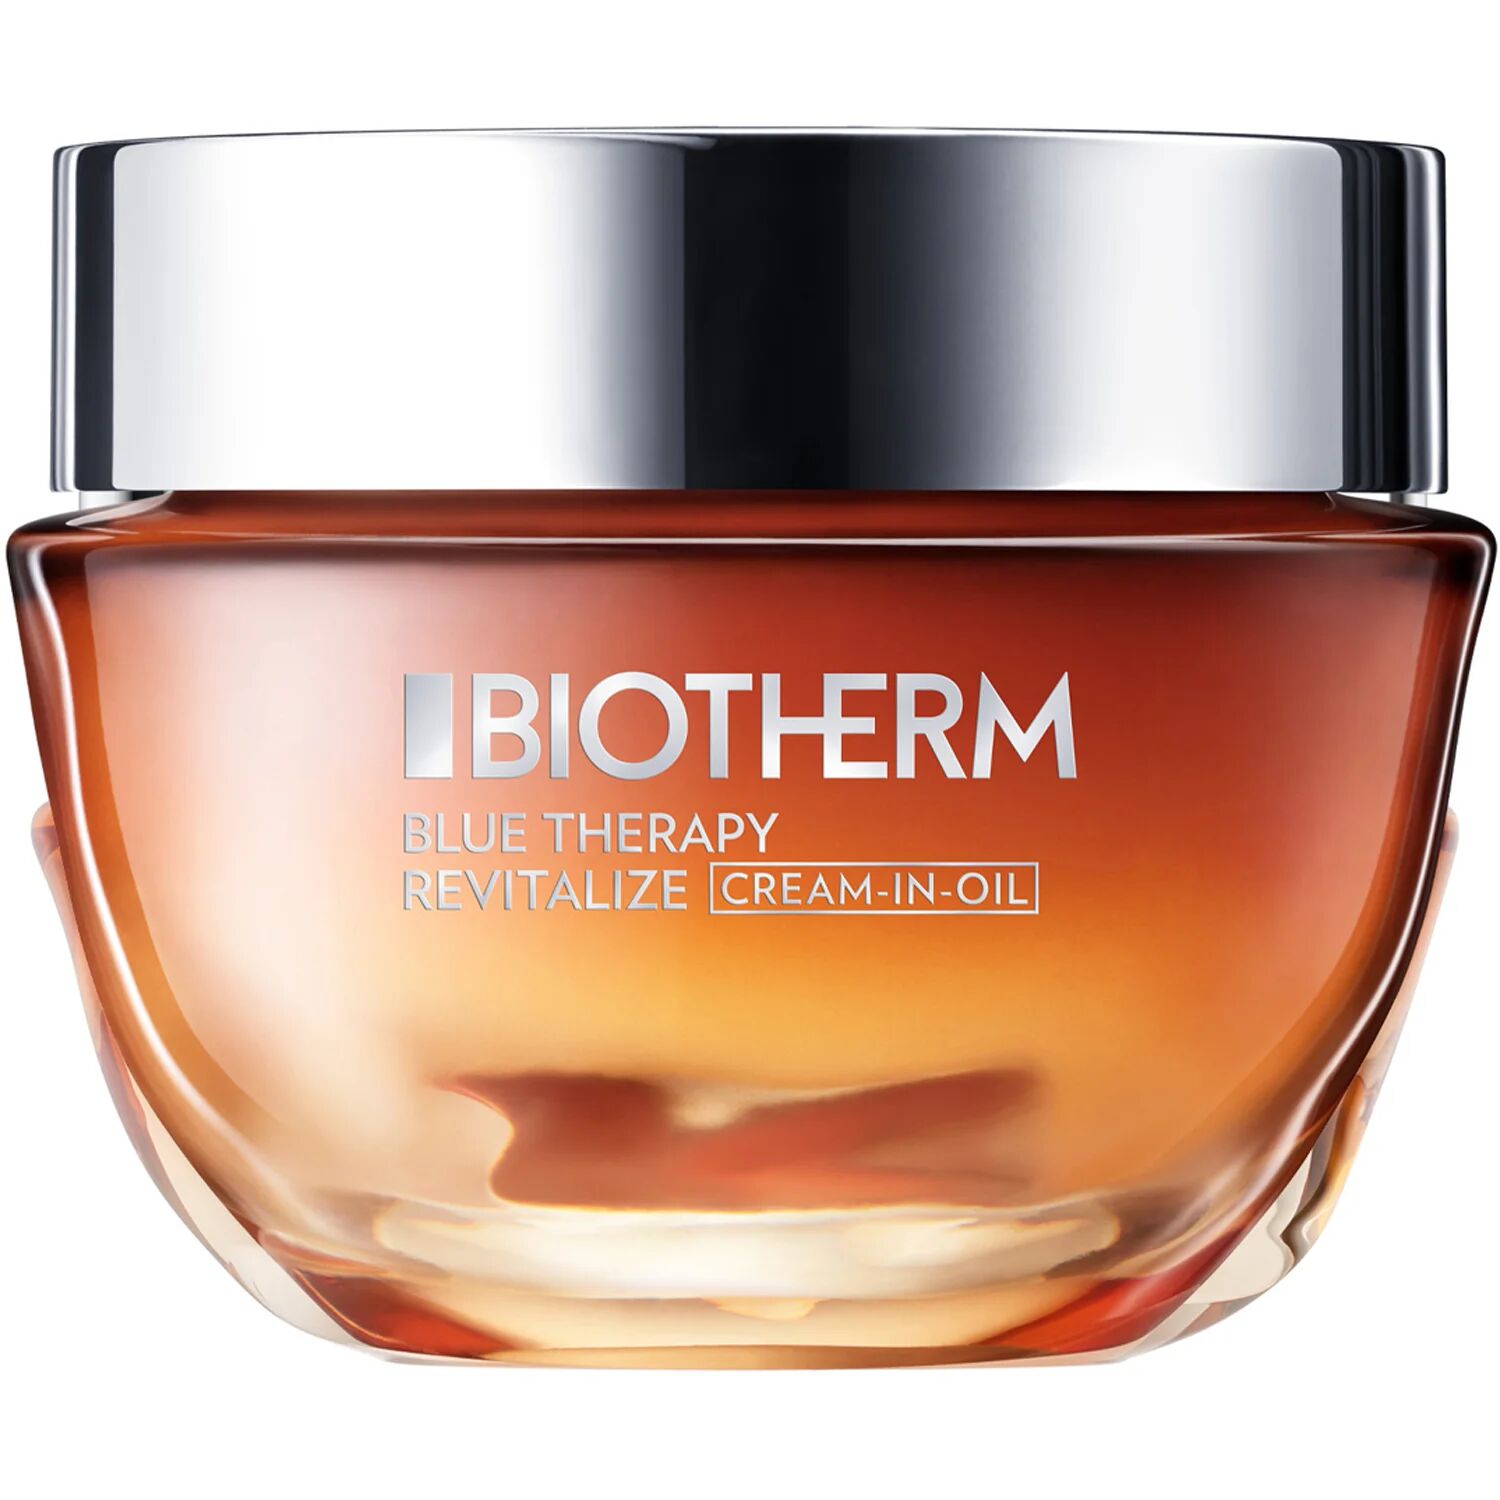 Biotherm Blue Therapy Cream in Oil, 50 ml Biotherm Dagkrem